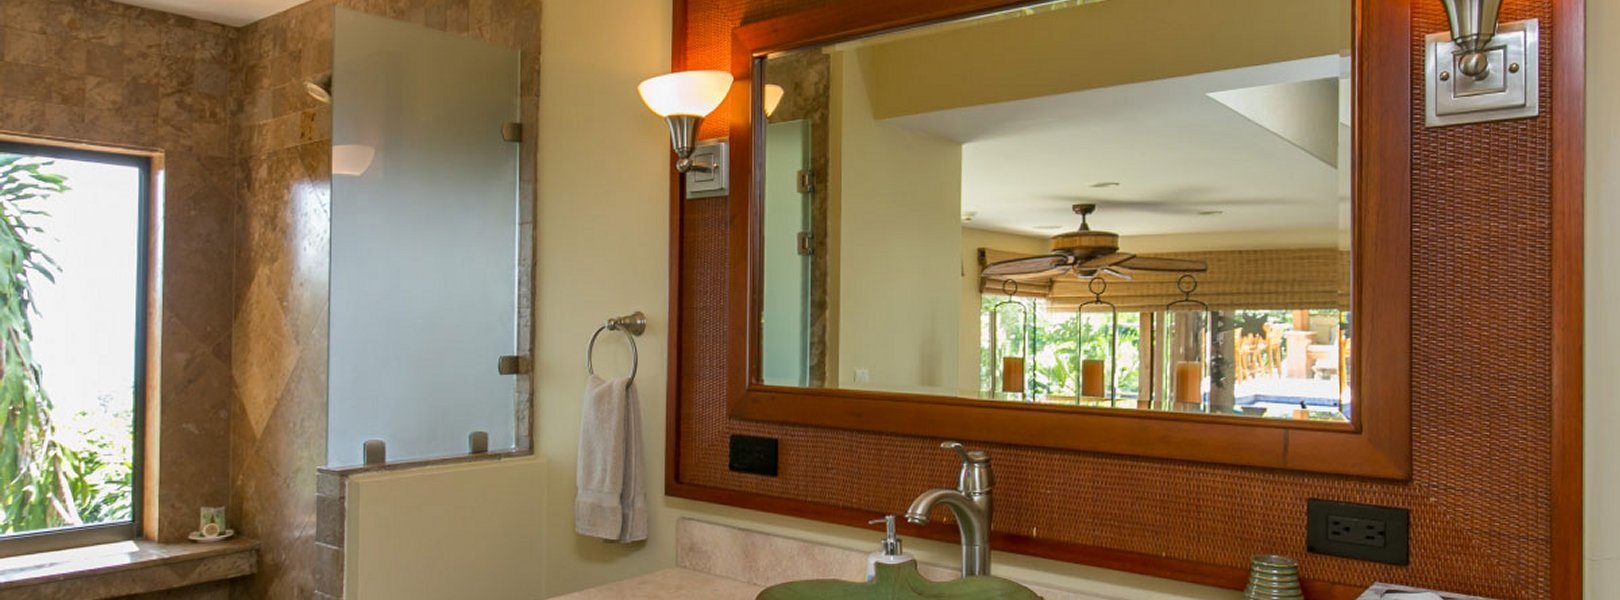 While on your vacation you will have access to this luxurious bathroom area with clean linens and beautiful views at MA-56.